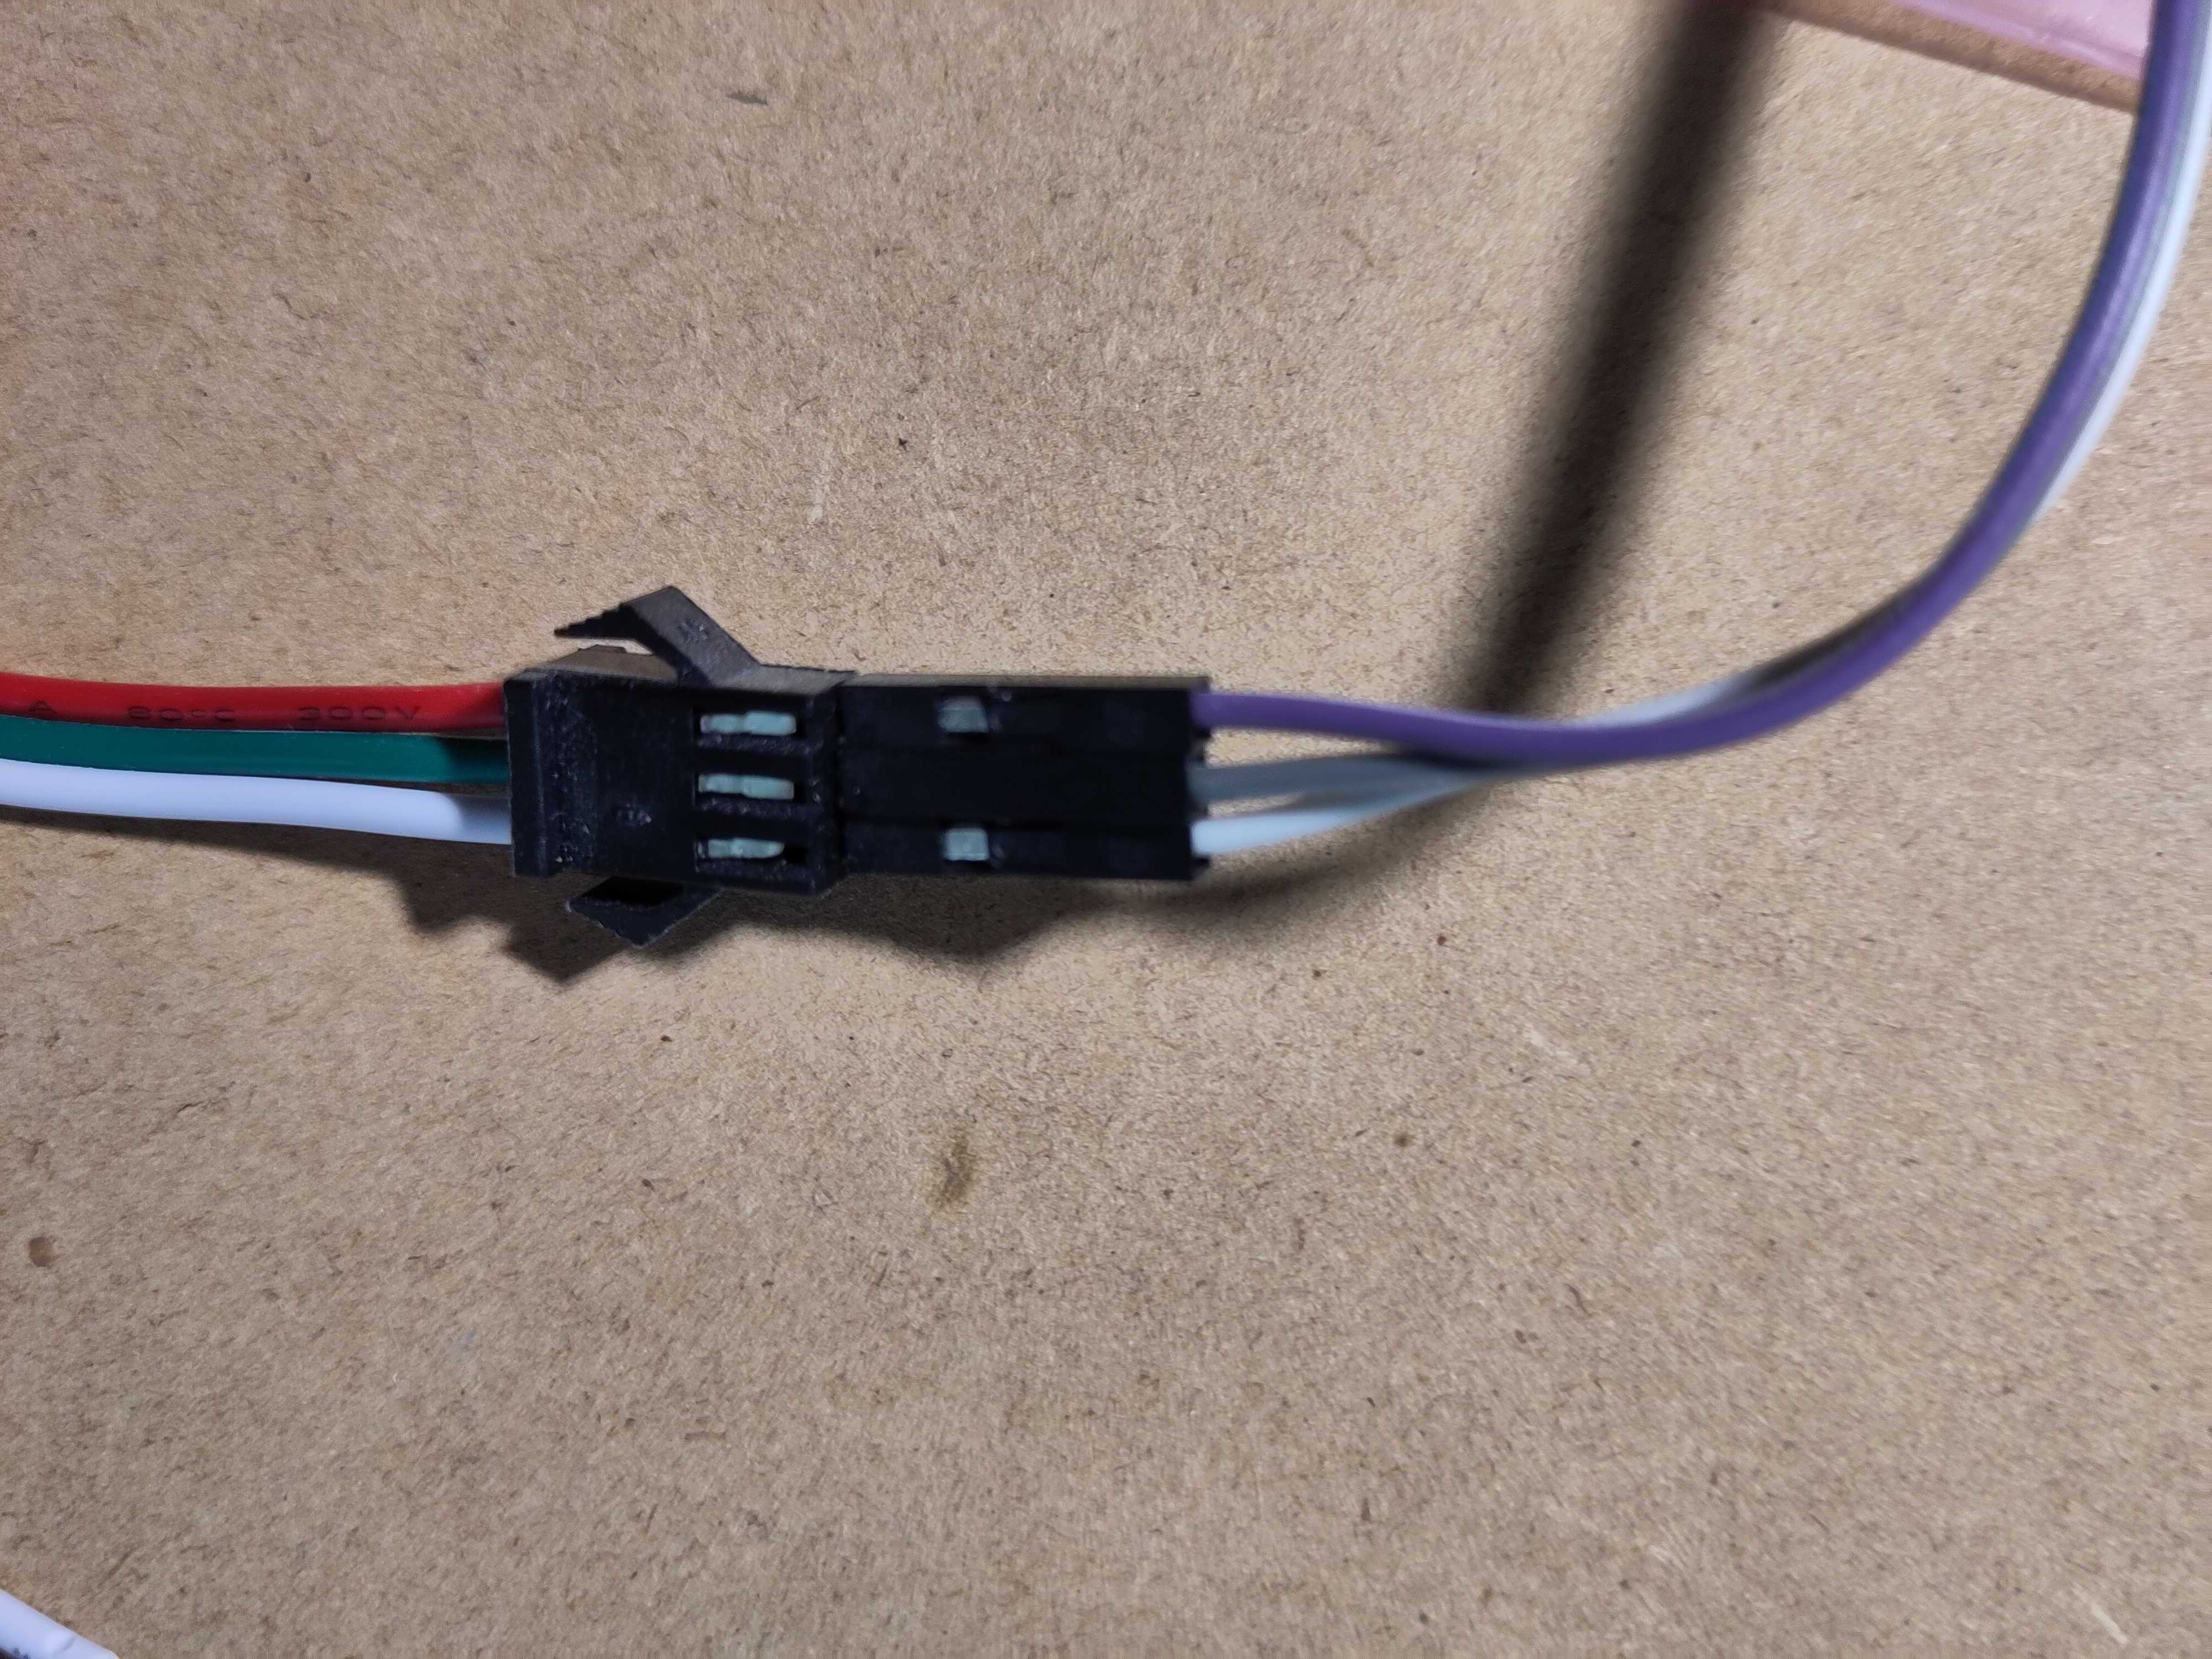 Connections for the LED strip